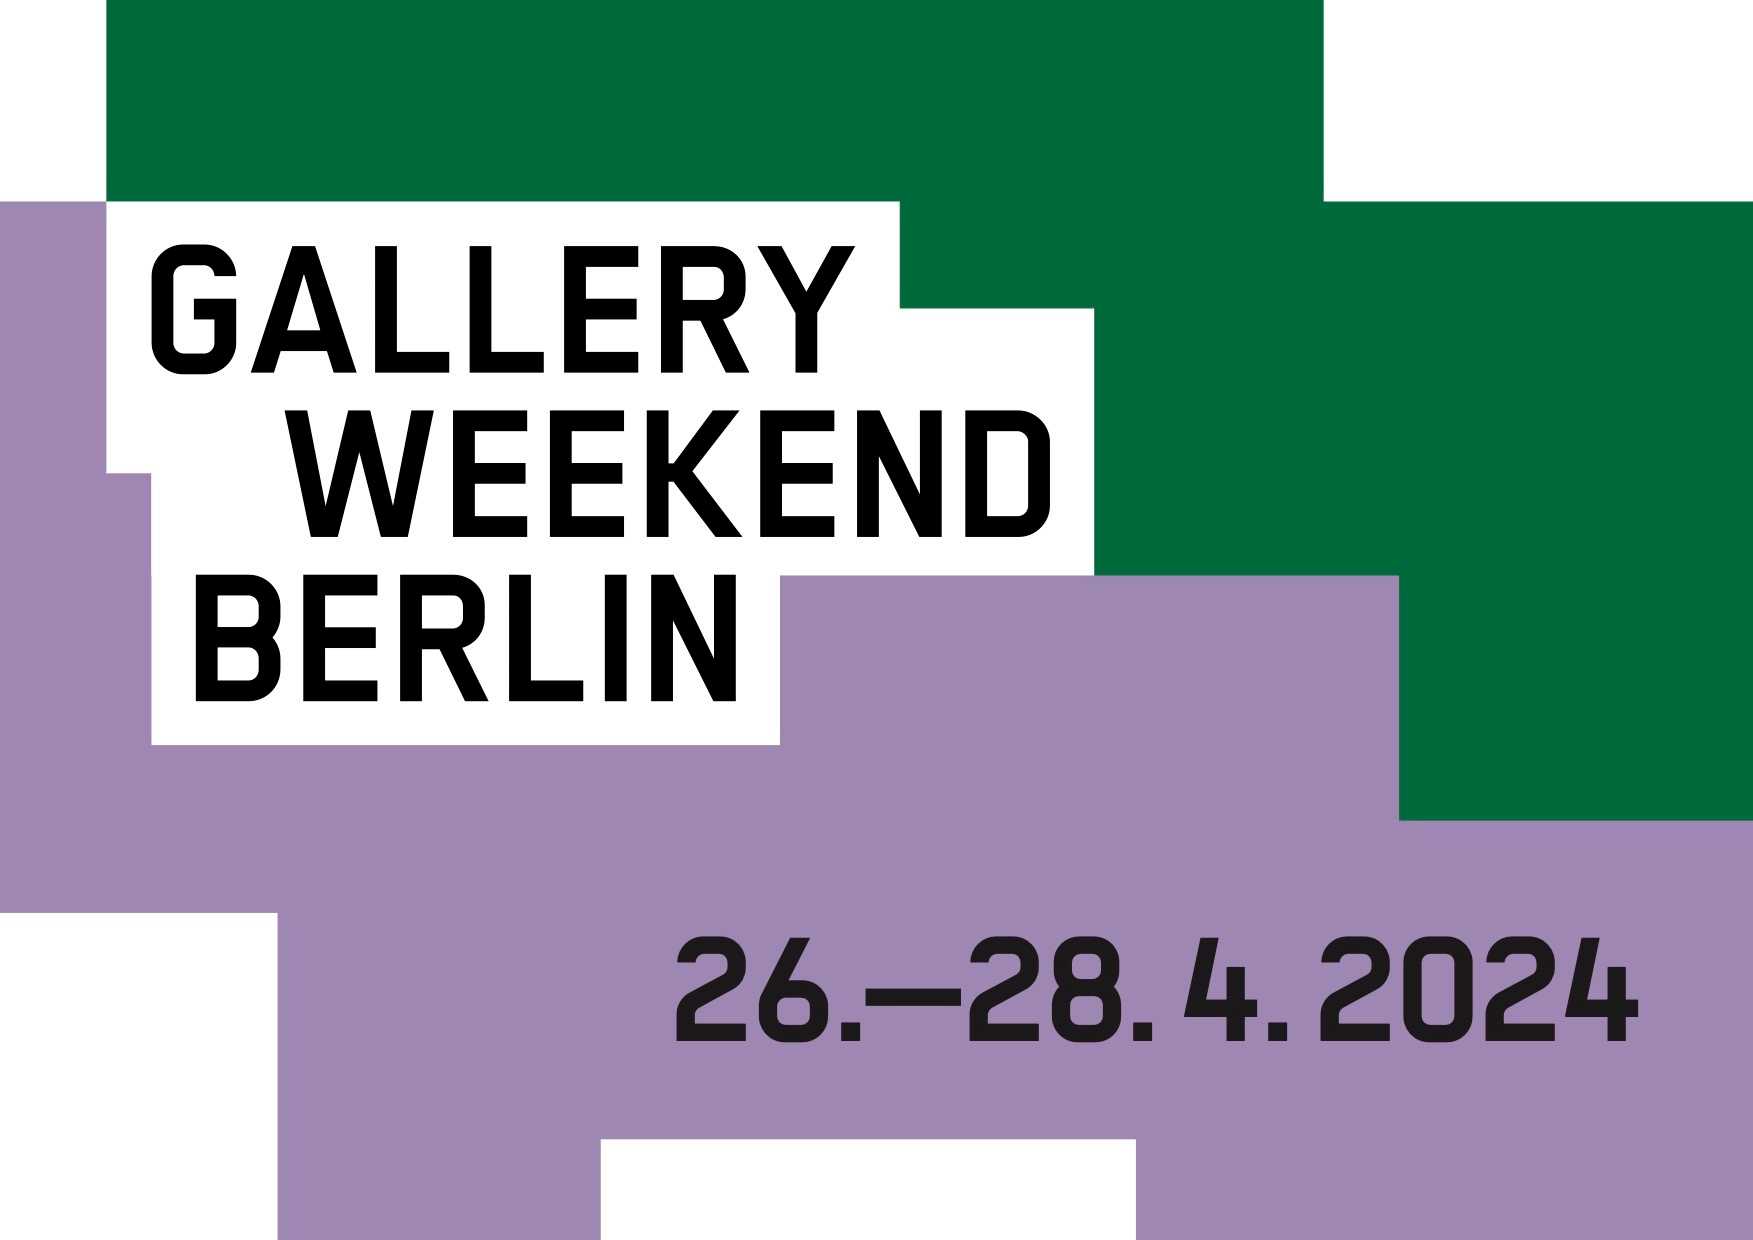 BMW is partner of Gallery Weekend Berlin 2024. New videos expand jointly initiated "Studio Visit" series.